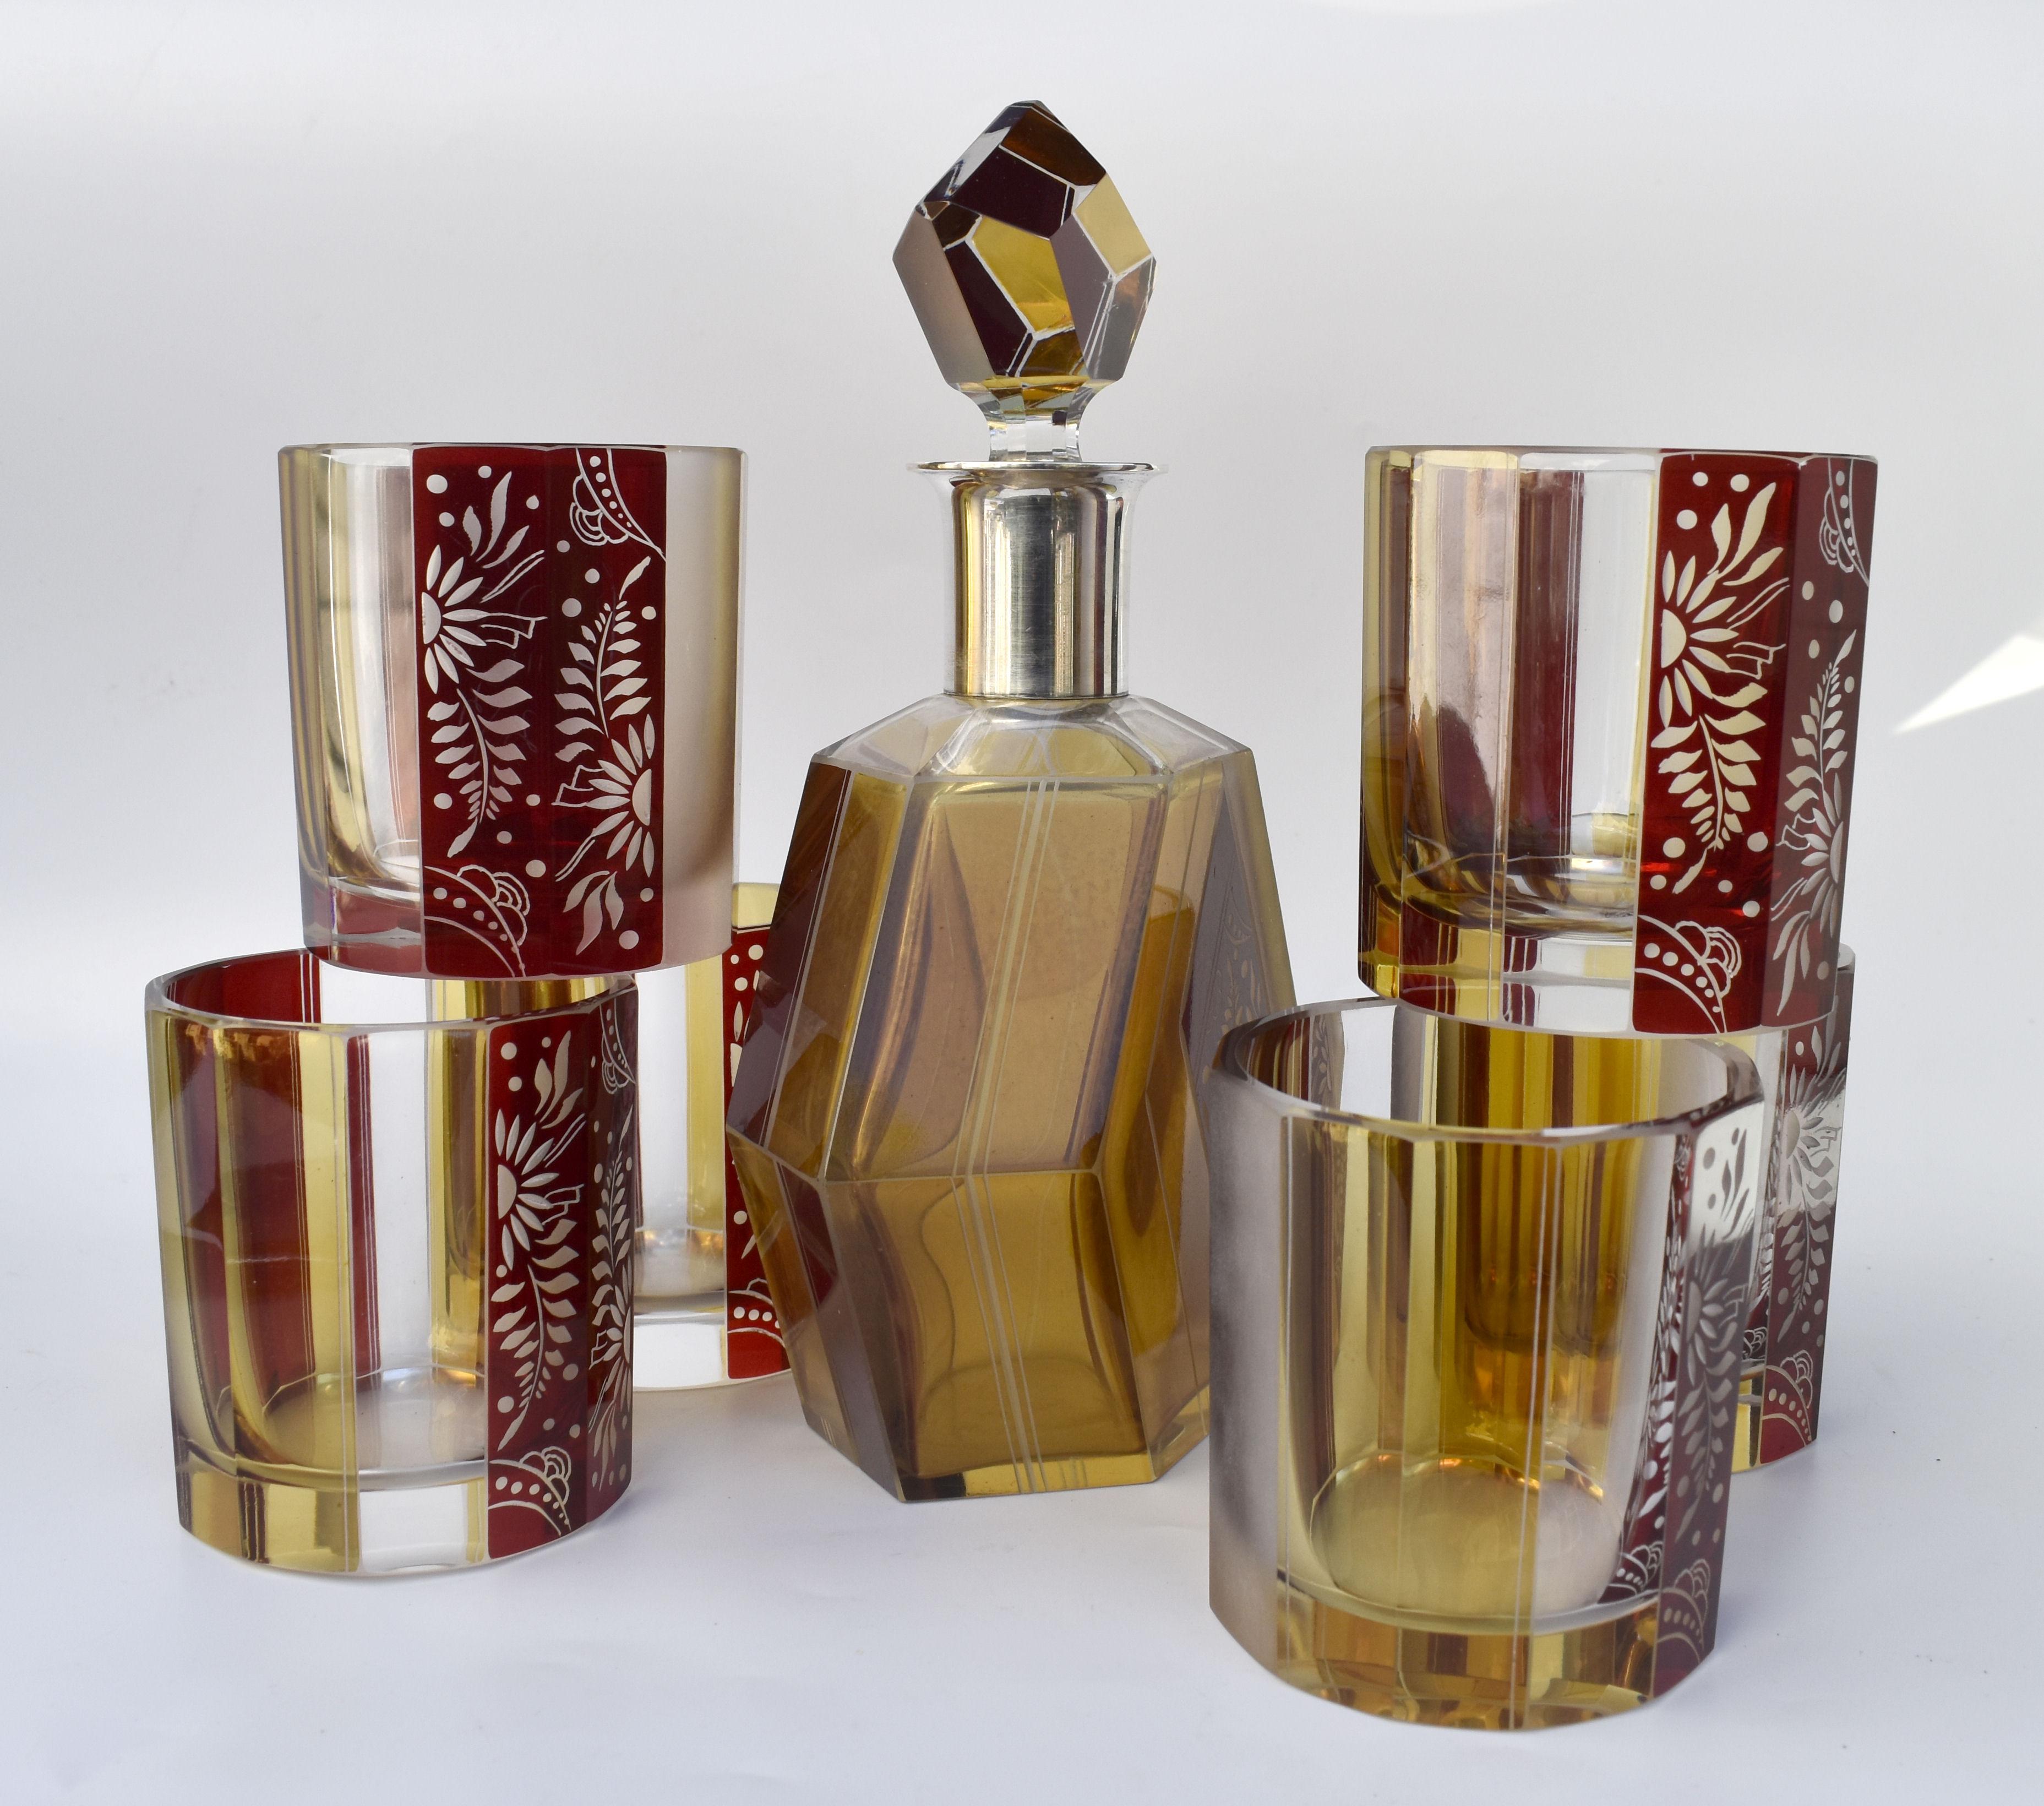 Wonderfully stylish Art Deco 1930's crystal glass decanter set which comes with six matching glasses and decanter with stopper, the whole being heavily enamelled with geometric floral decoration. Glass is an attractive frosted etched design in a